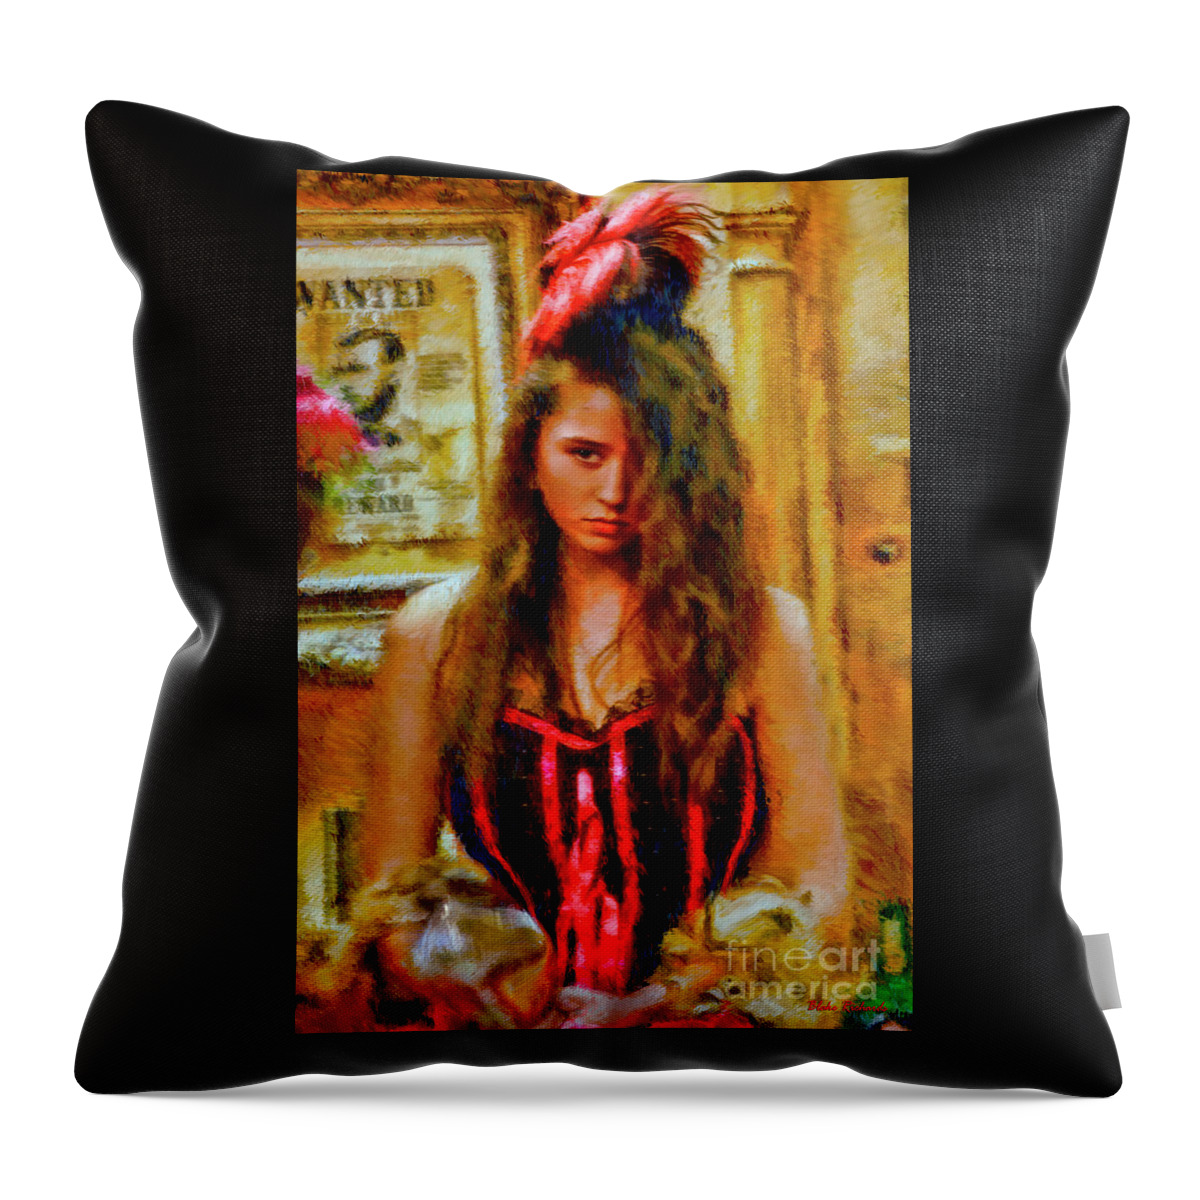 Pretty Girls Throw Pillow featuring the photograph Saloon Girl by Blake Richards